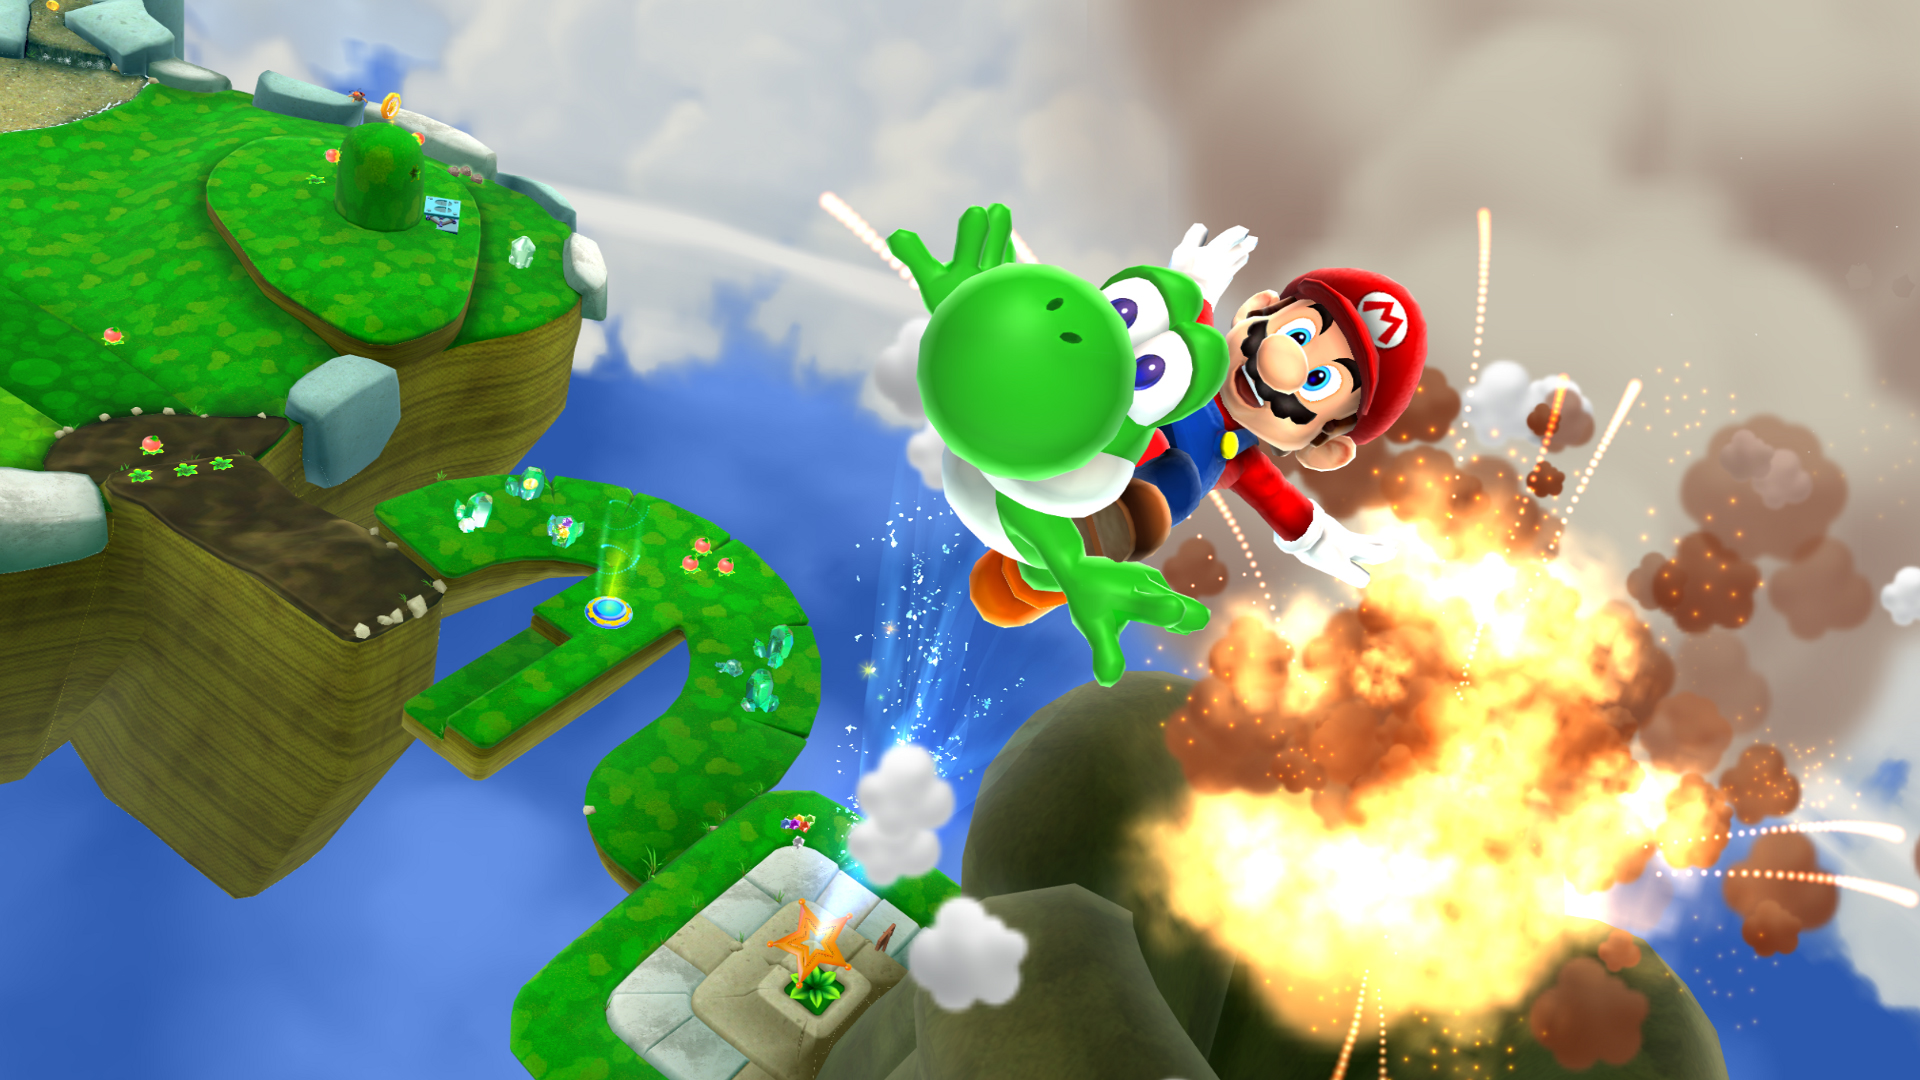 The Super Mario series is now synonymous with innovation like the Super Mario Galaxy.